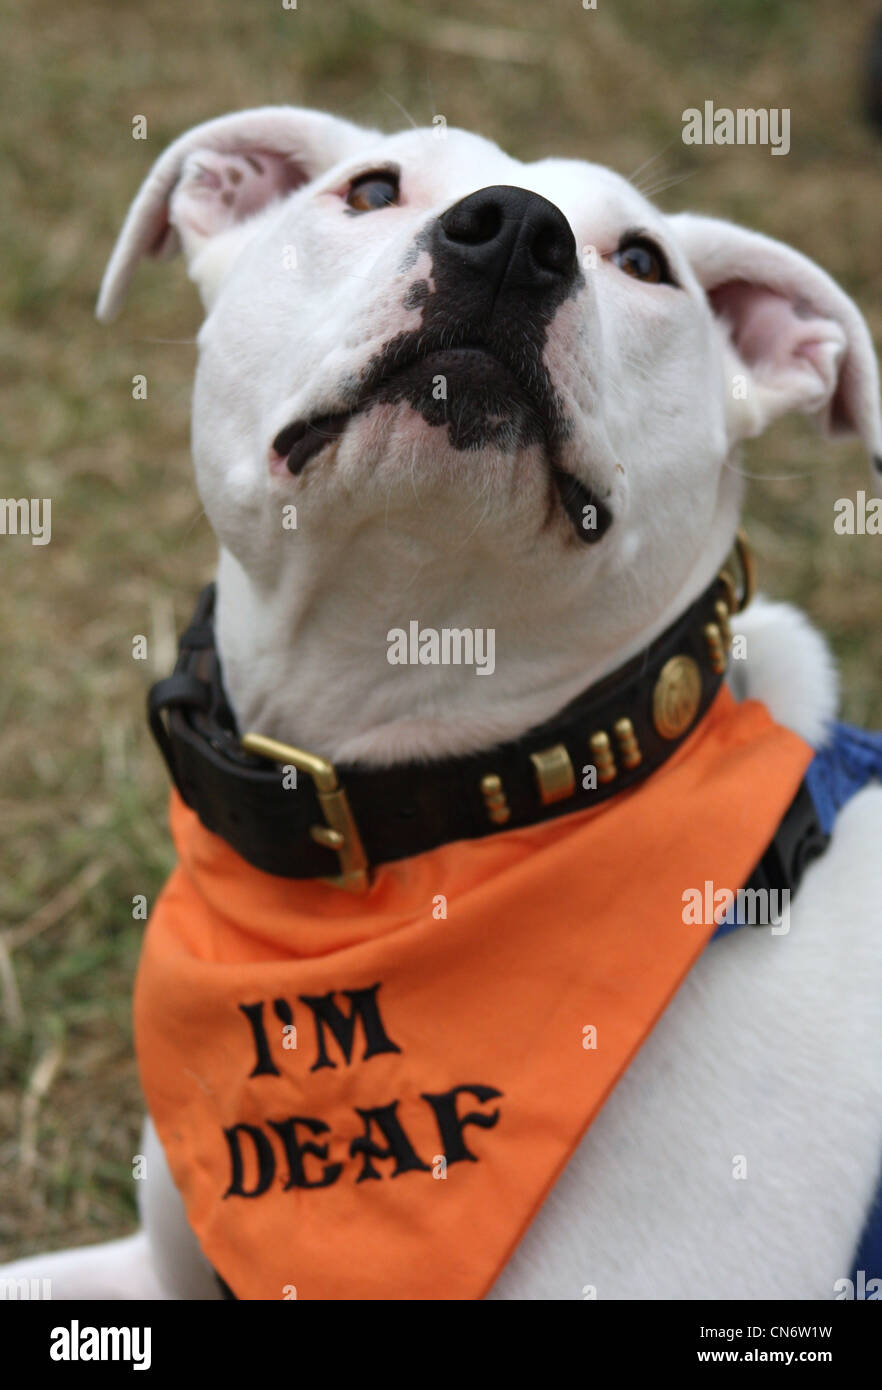 Deaf dog with banner Stock Photo